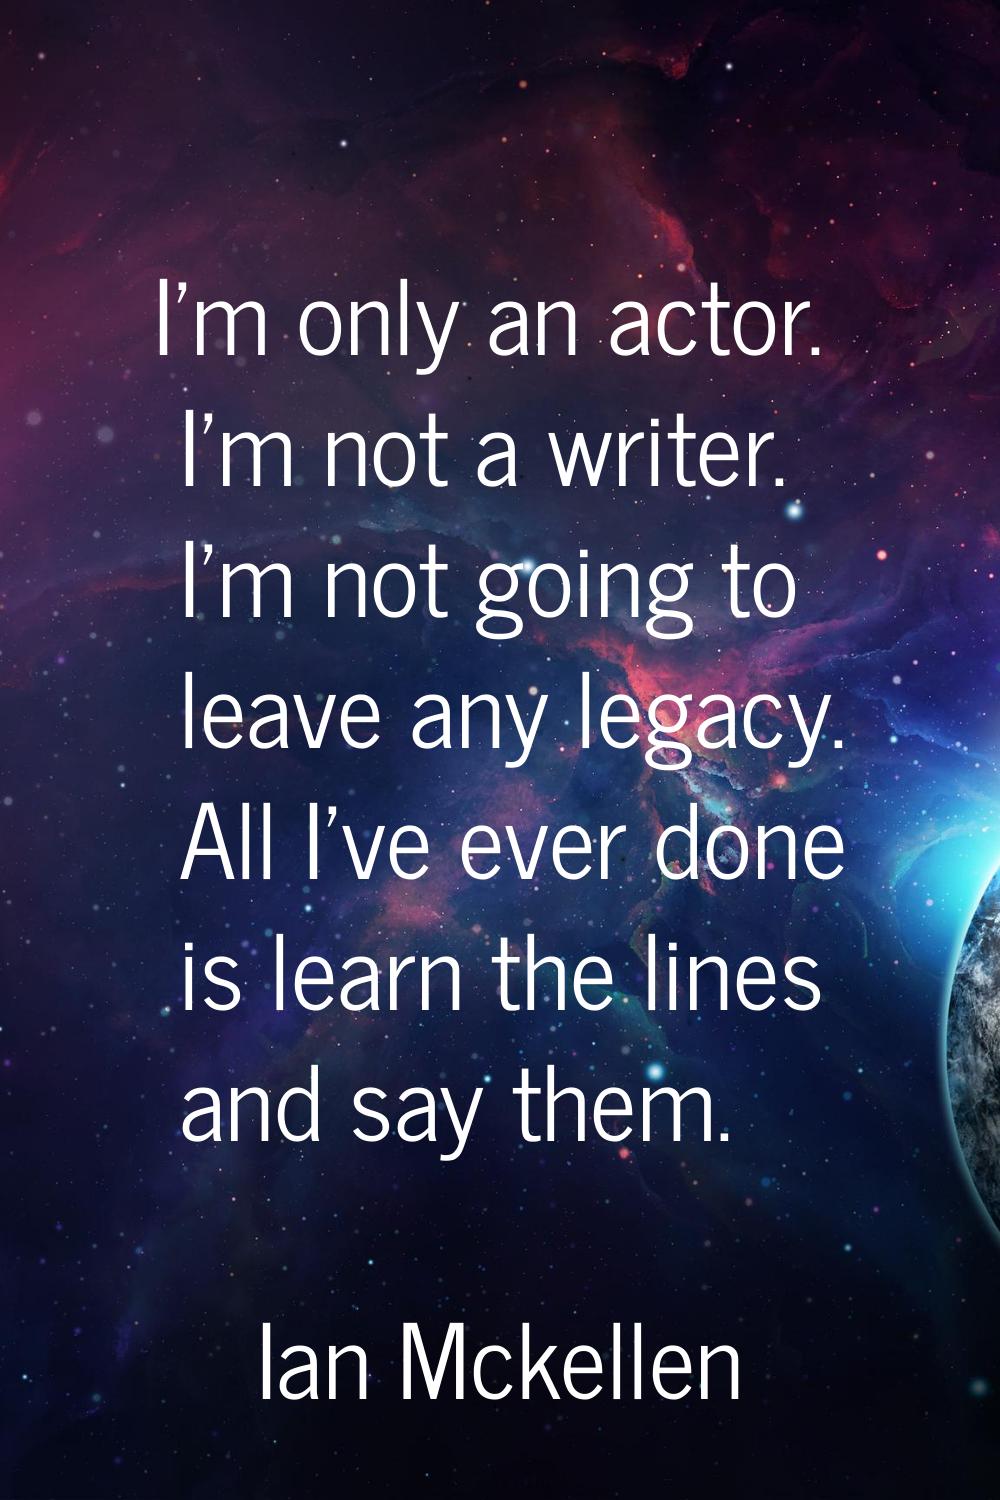 I'm only an actor. I'm not a writer. I'm not going to leave any legacy. All I've ever done is learn